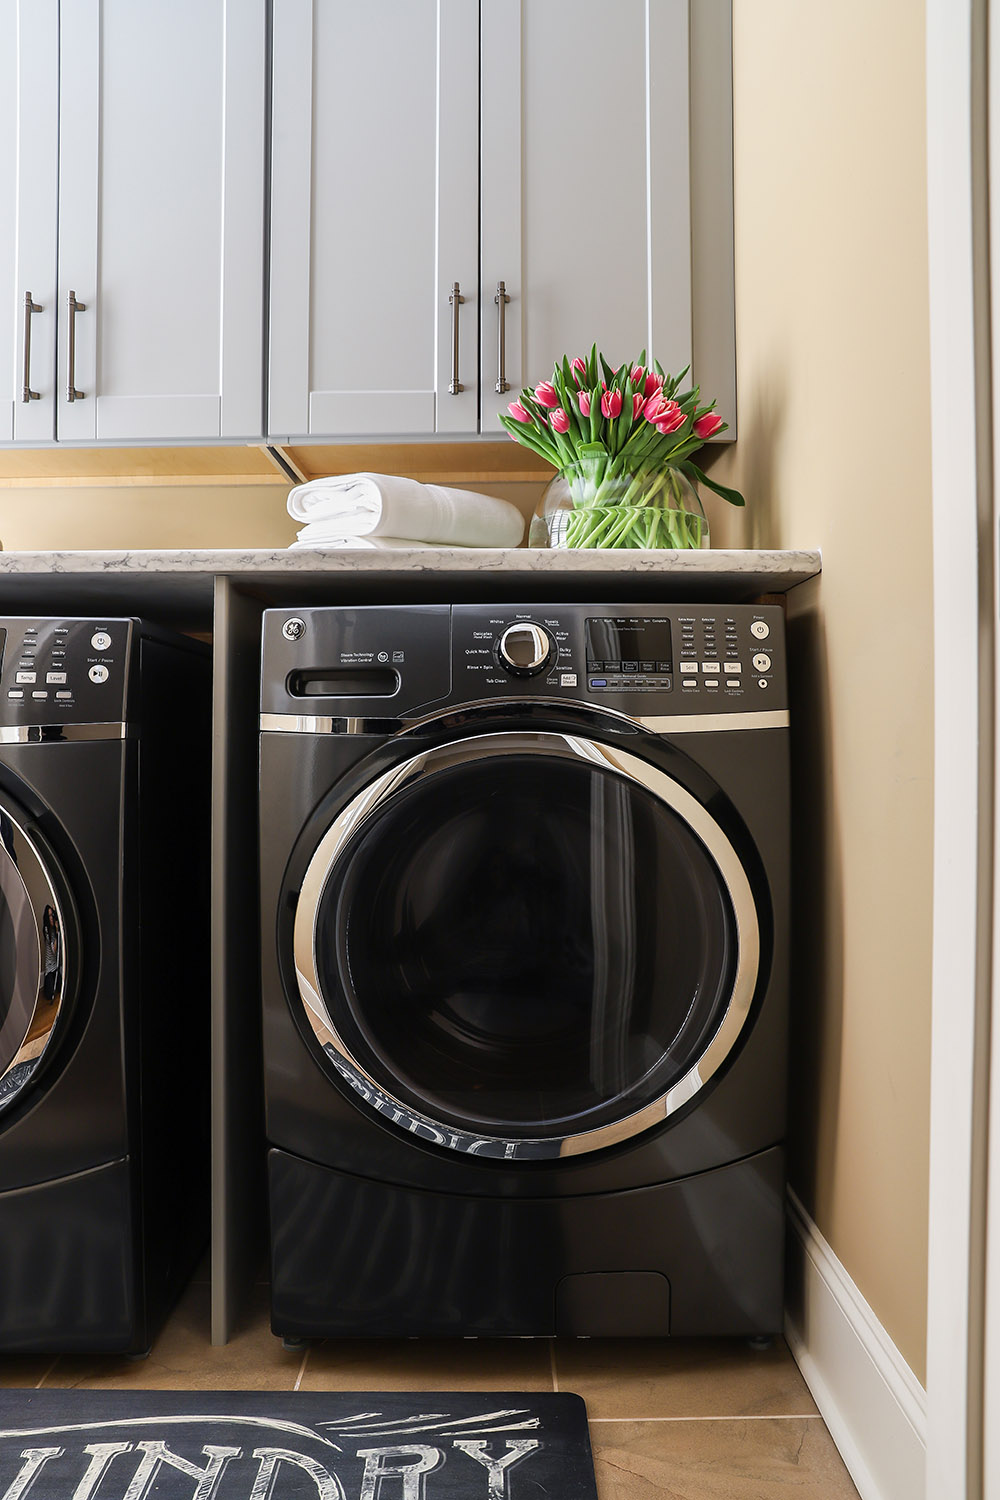 How to Install Countertop Above Washer and Dryer - Best Tips and Tricks